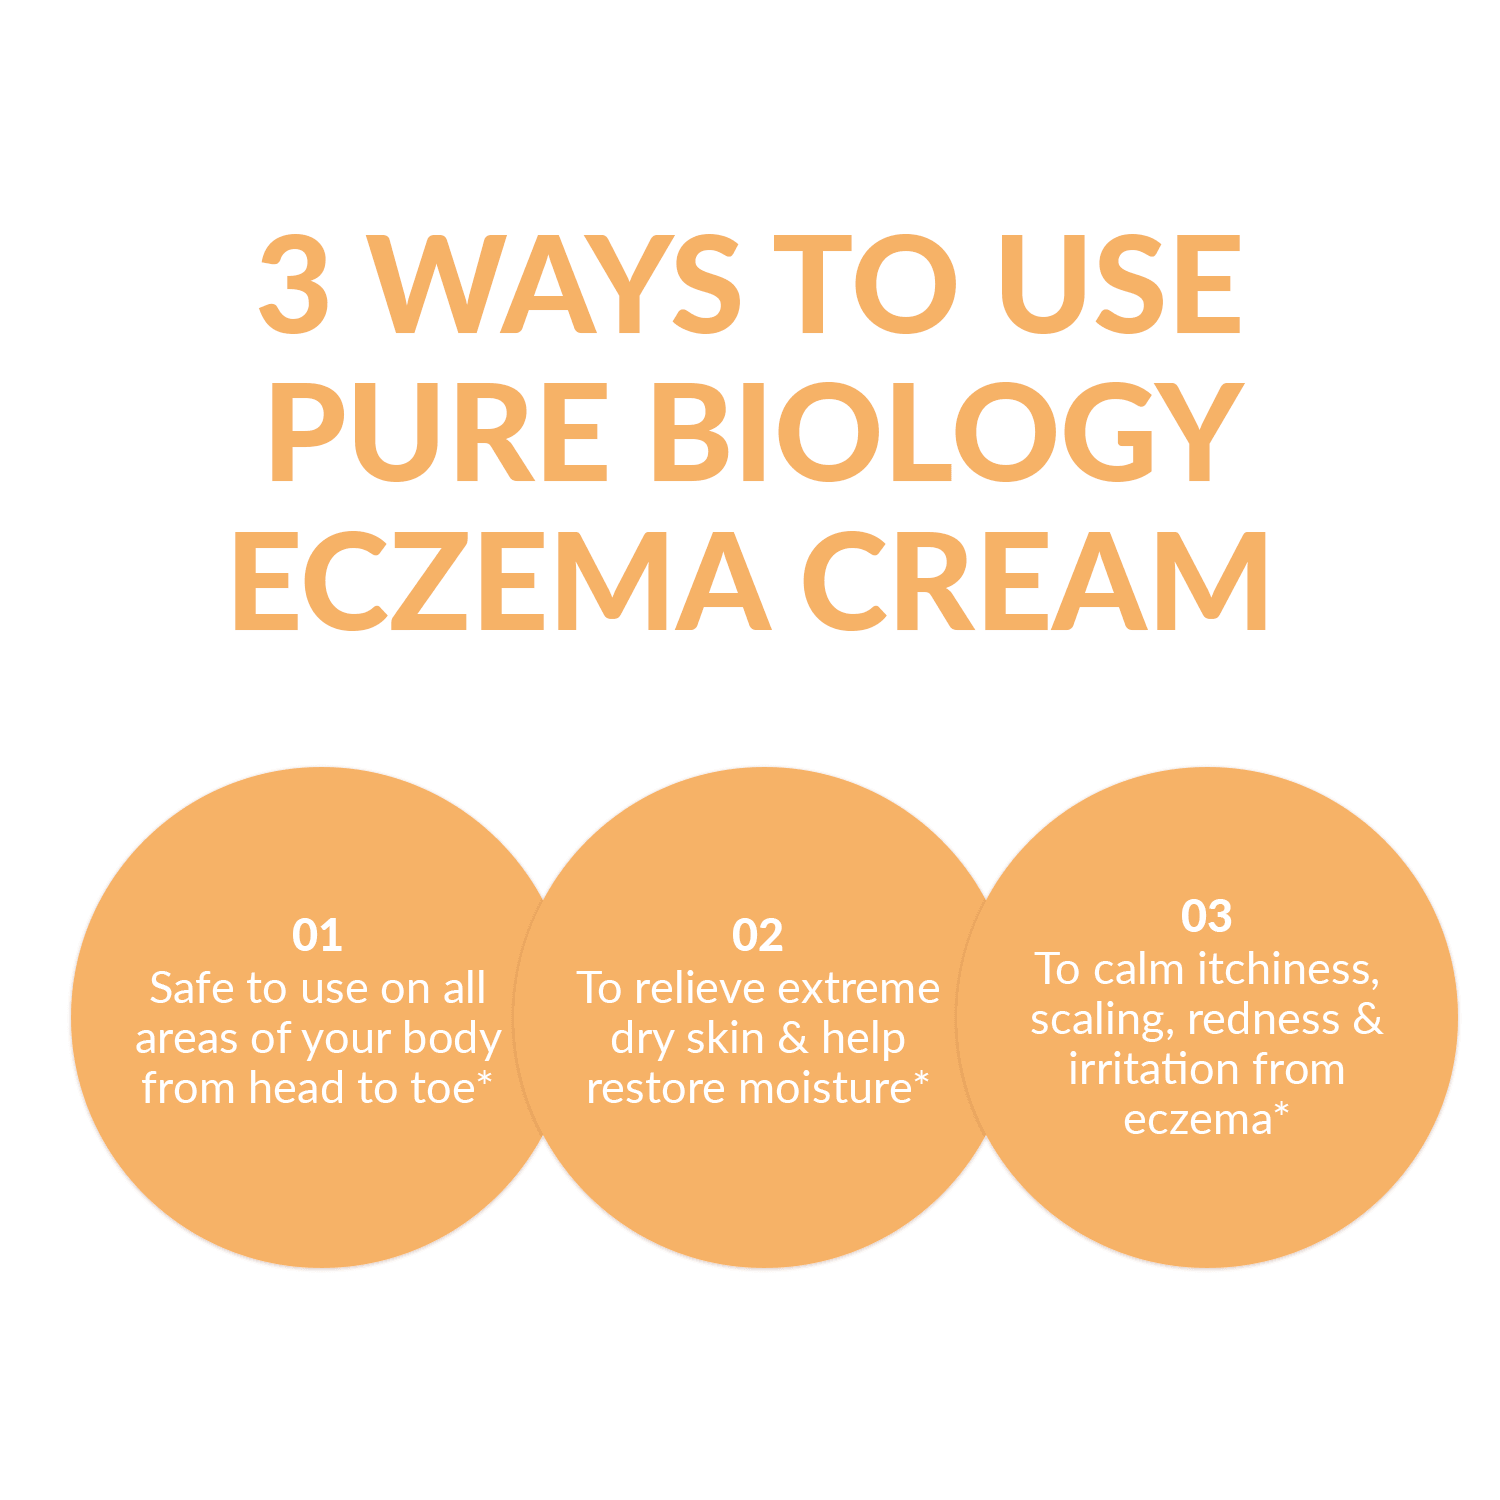 new products for eczema